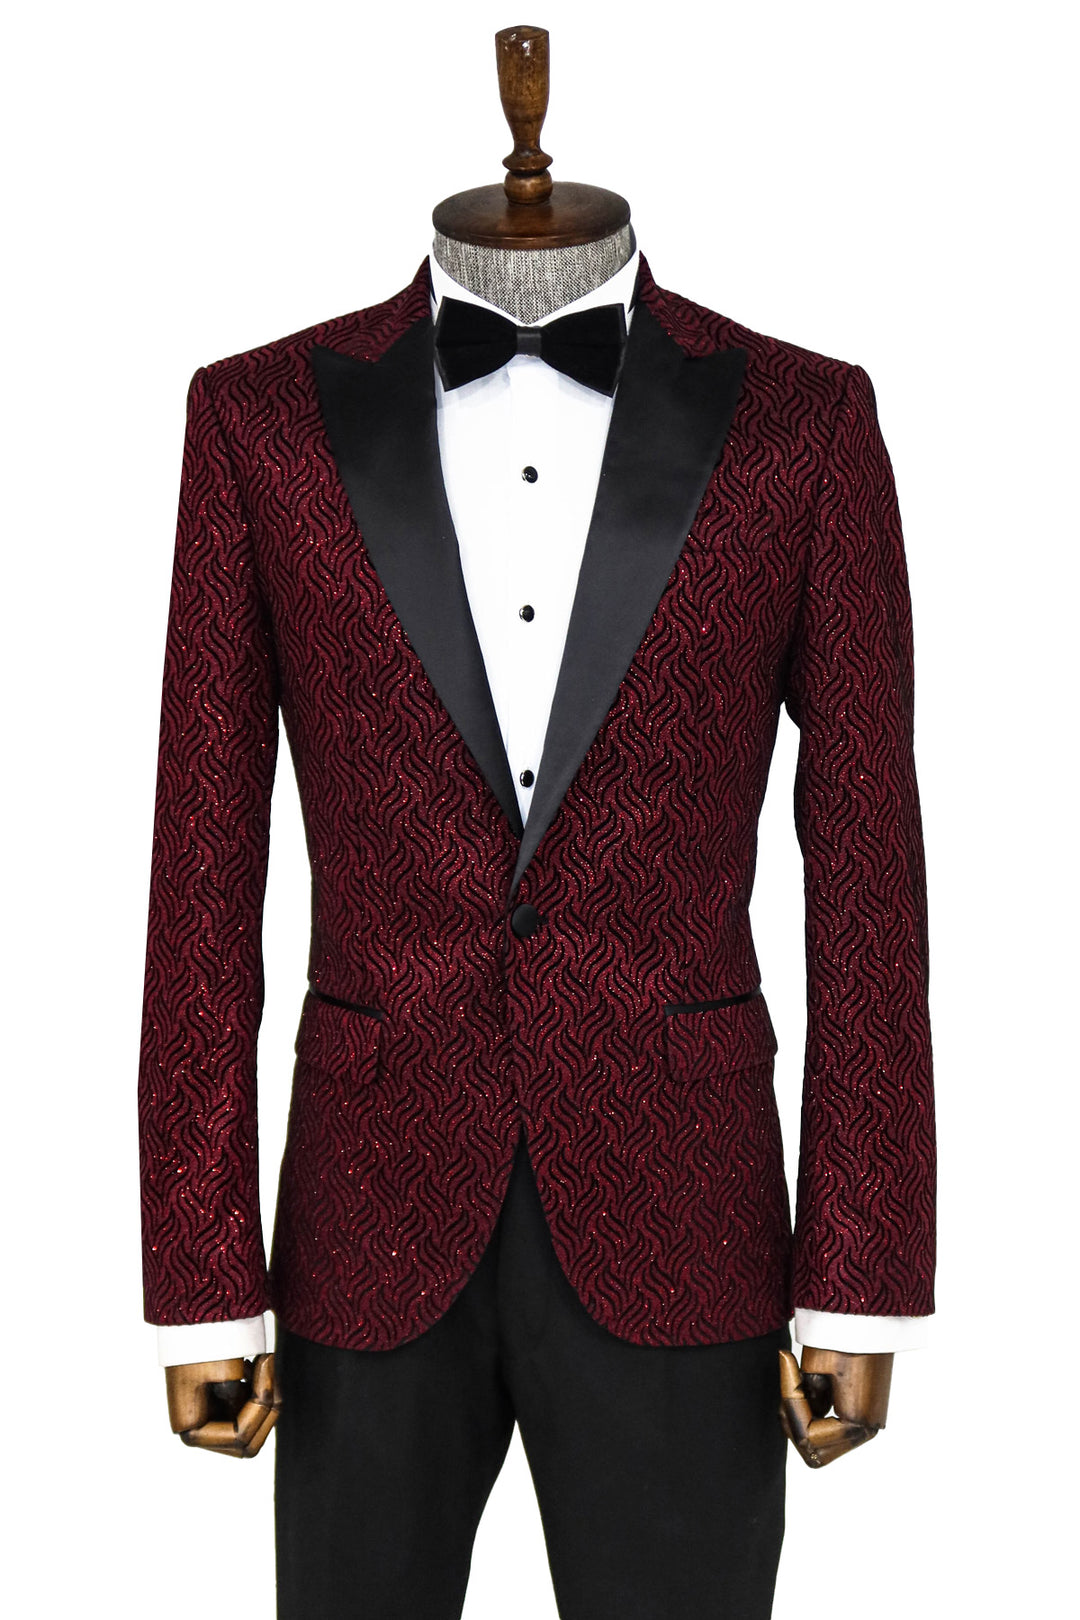 What Are The Looks One Can Achieve With A Burgundy Blazer?